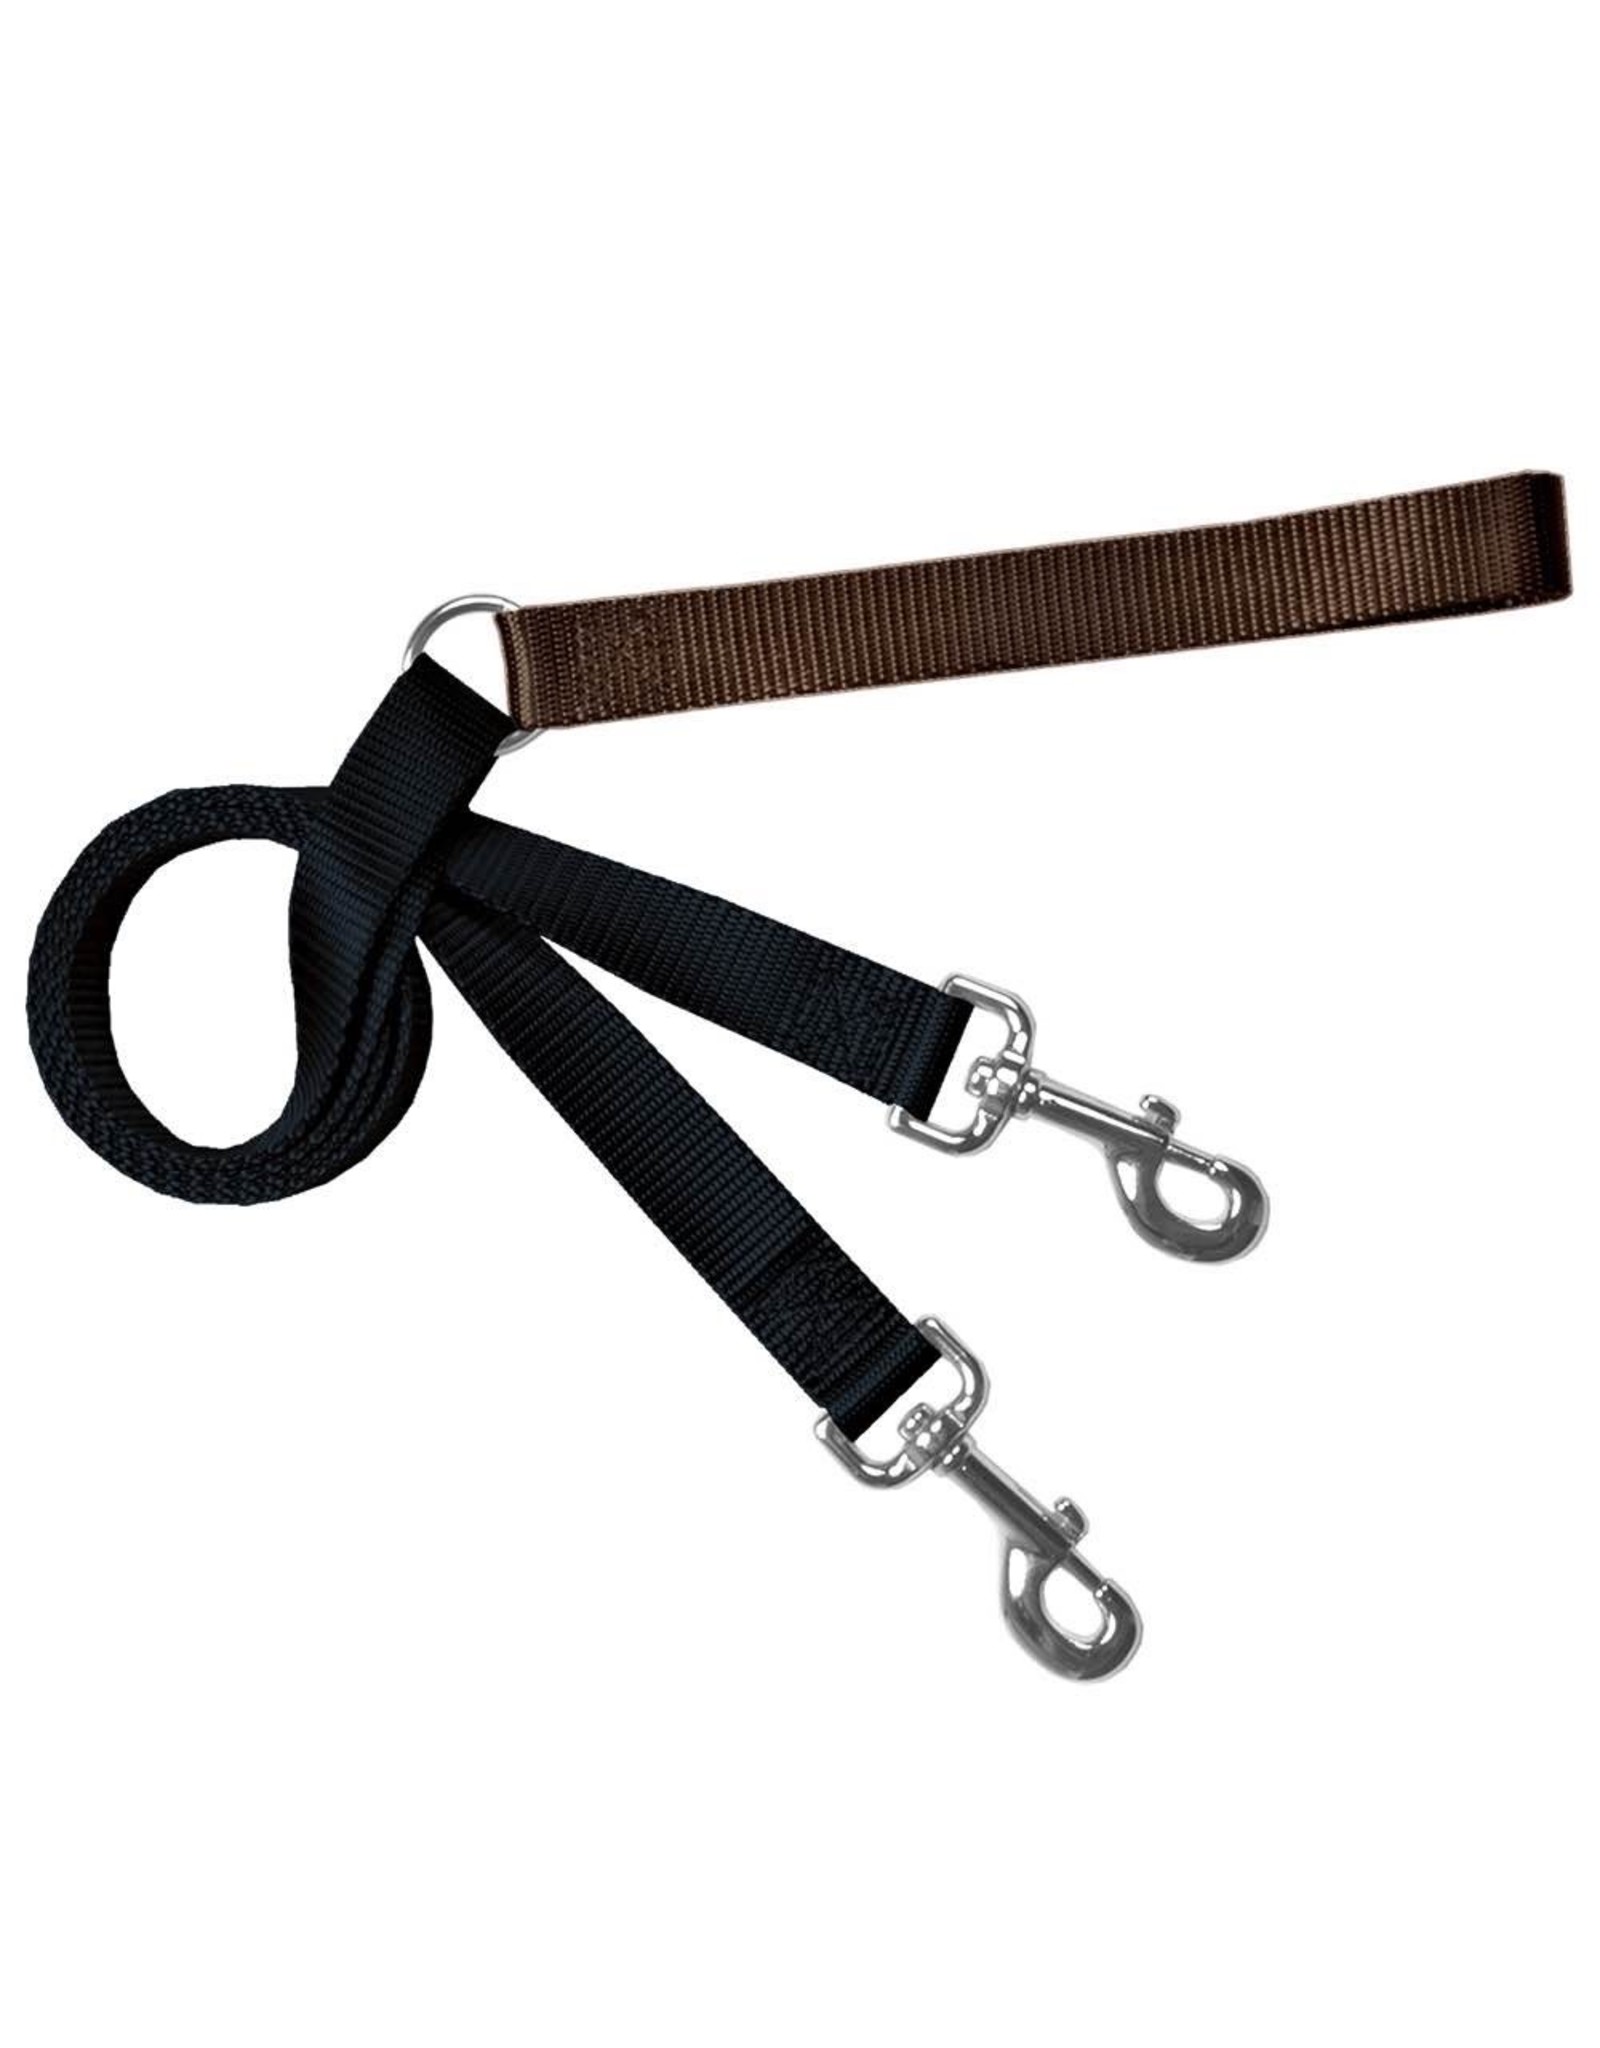 2 Hounds Design Double Connection Training Lead: Brown, 1"